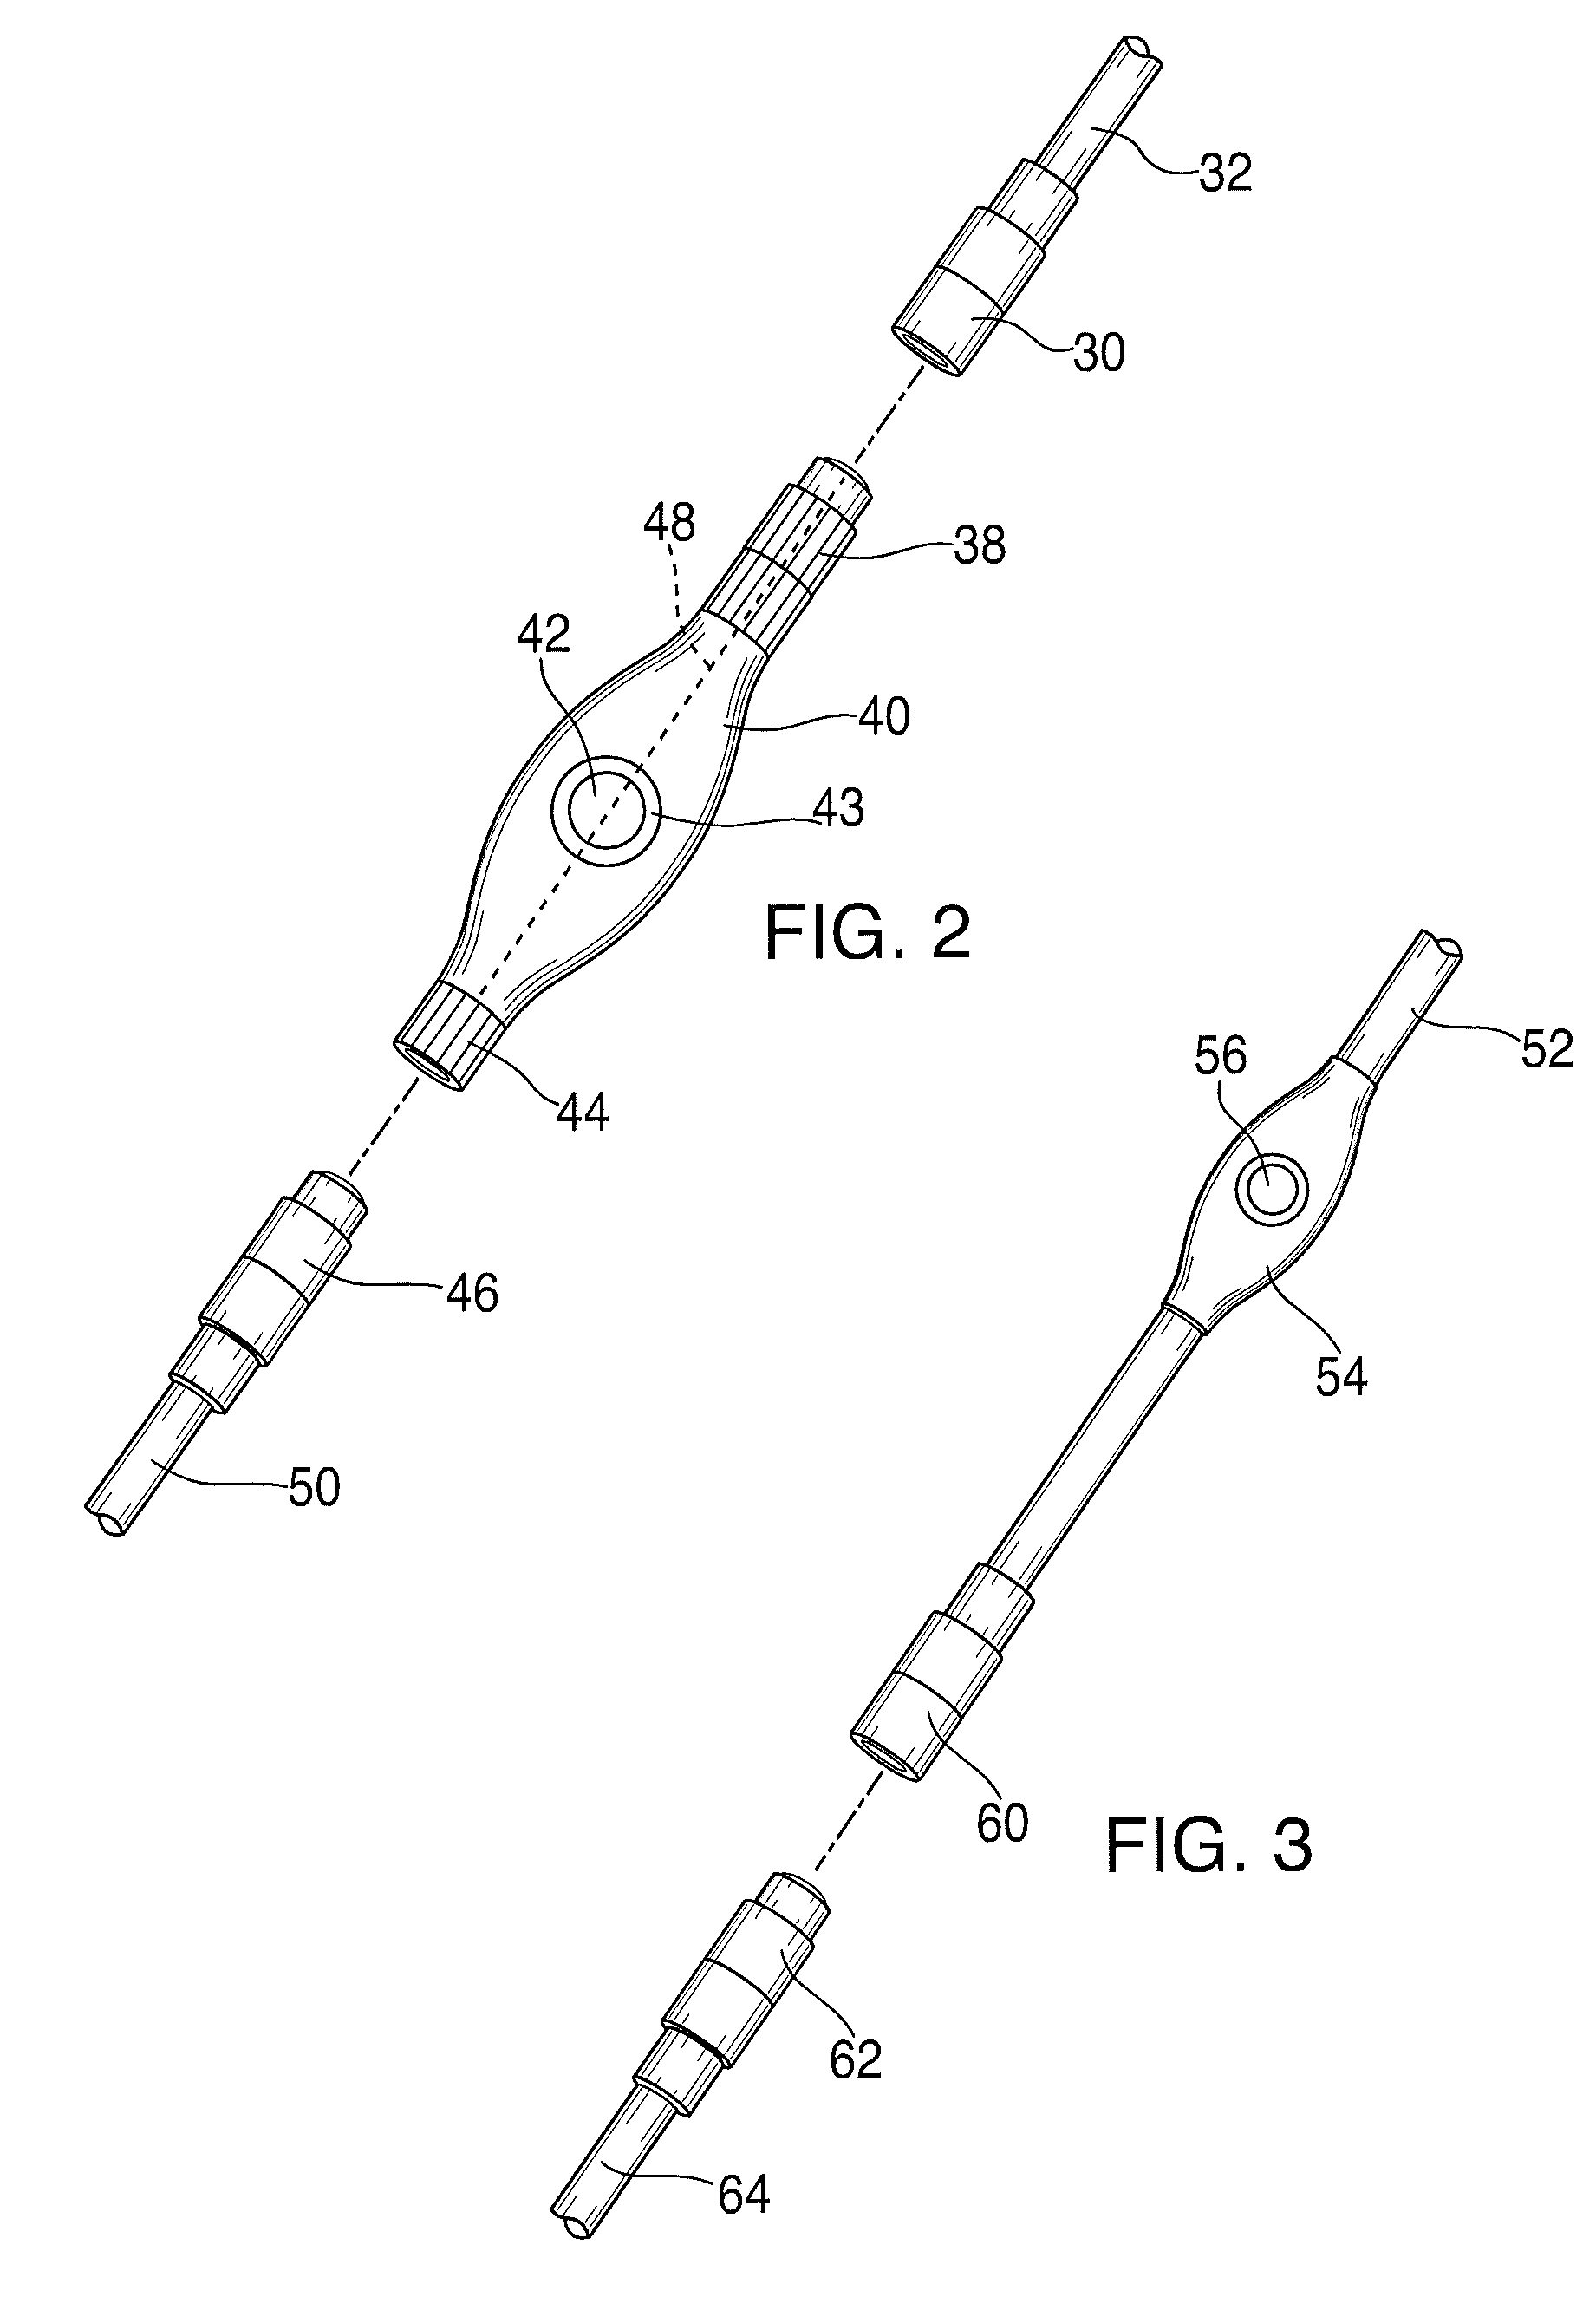 Ablation catheter system with safety features